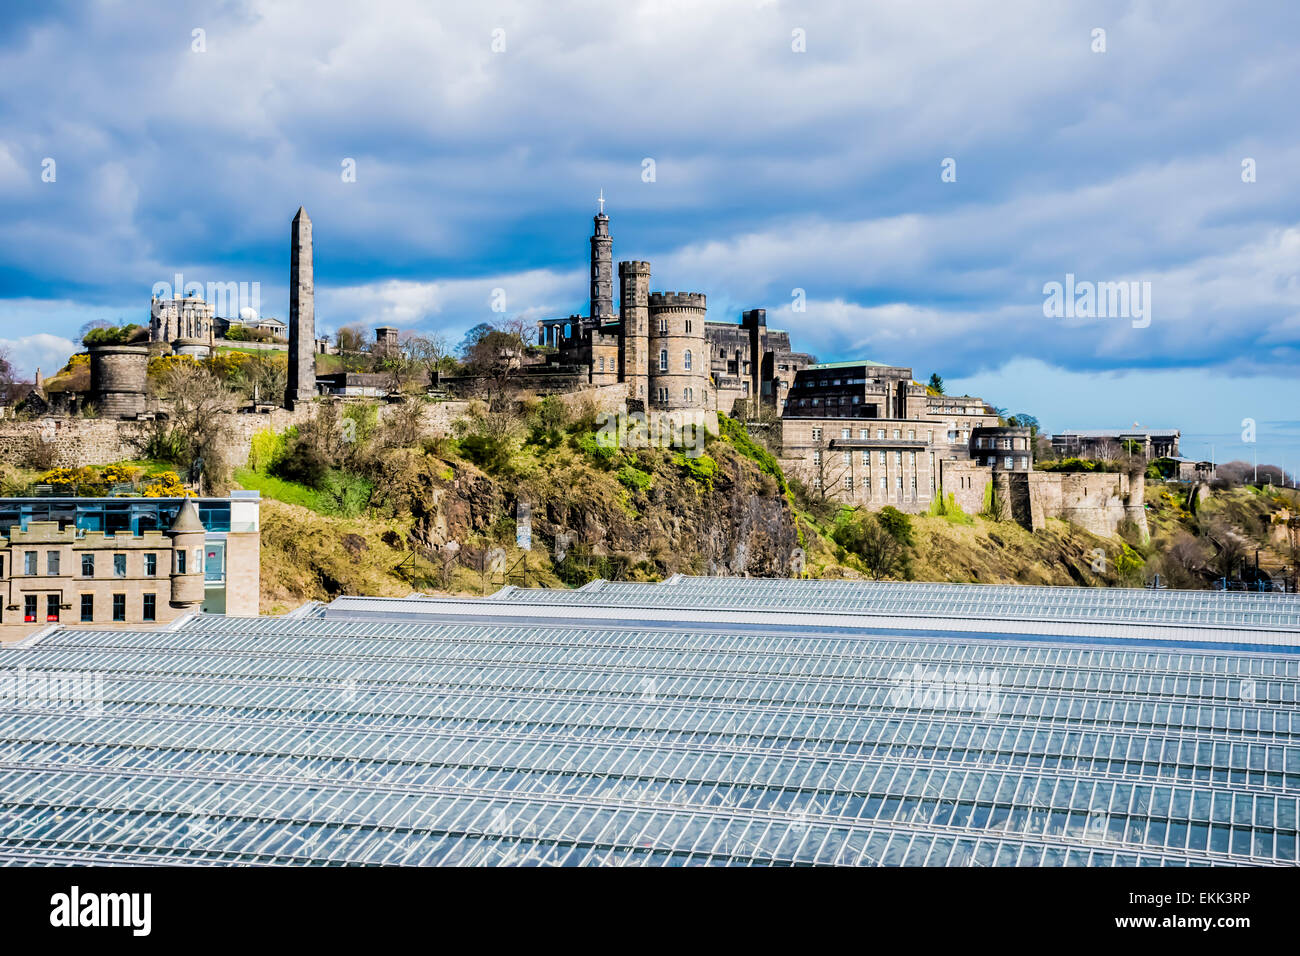 View towards Calton Hill in Edinburgh, Scotland over the large glazed roof of Waverley Railway Station Stock Photo